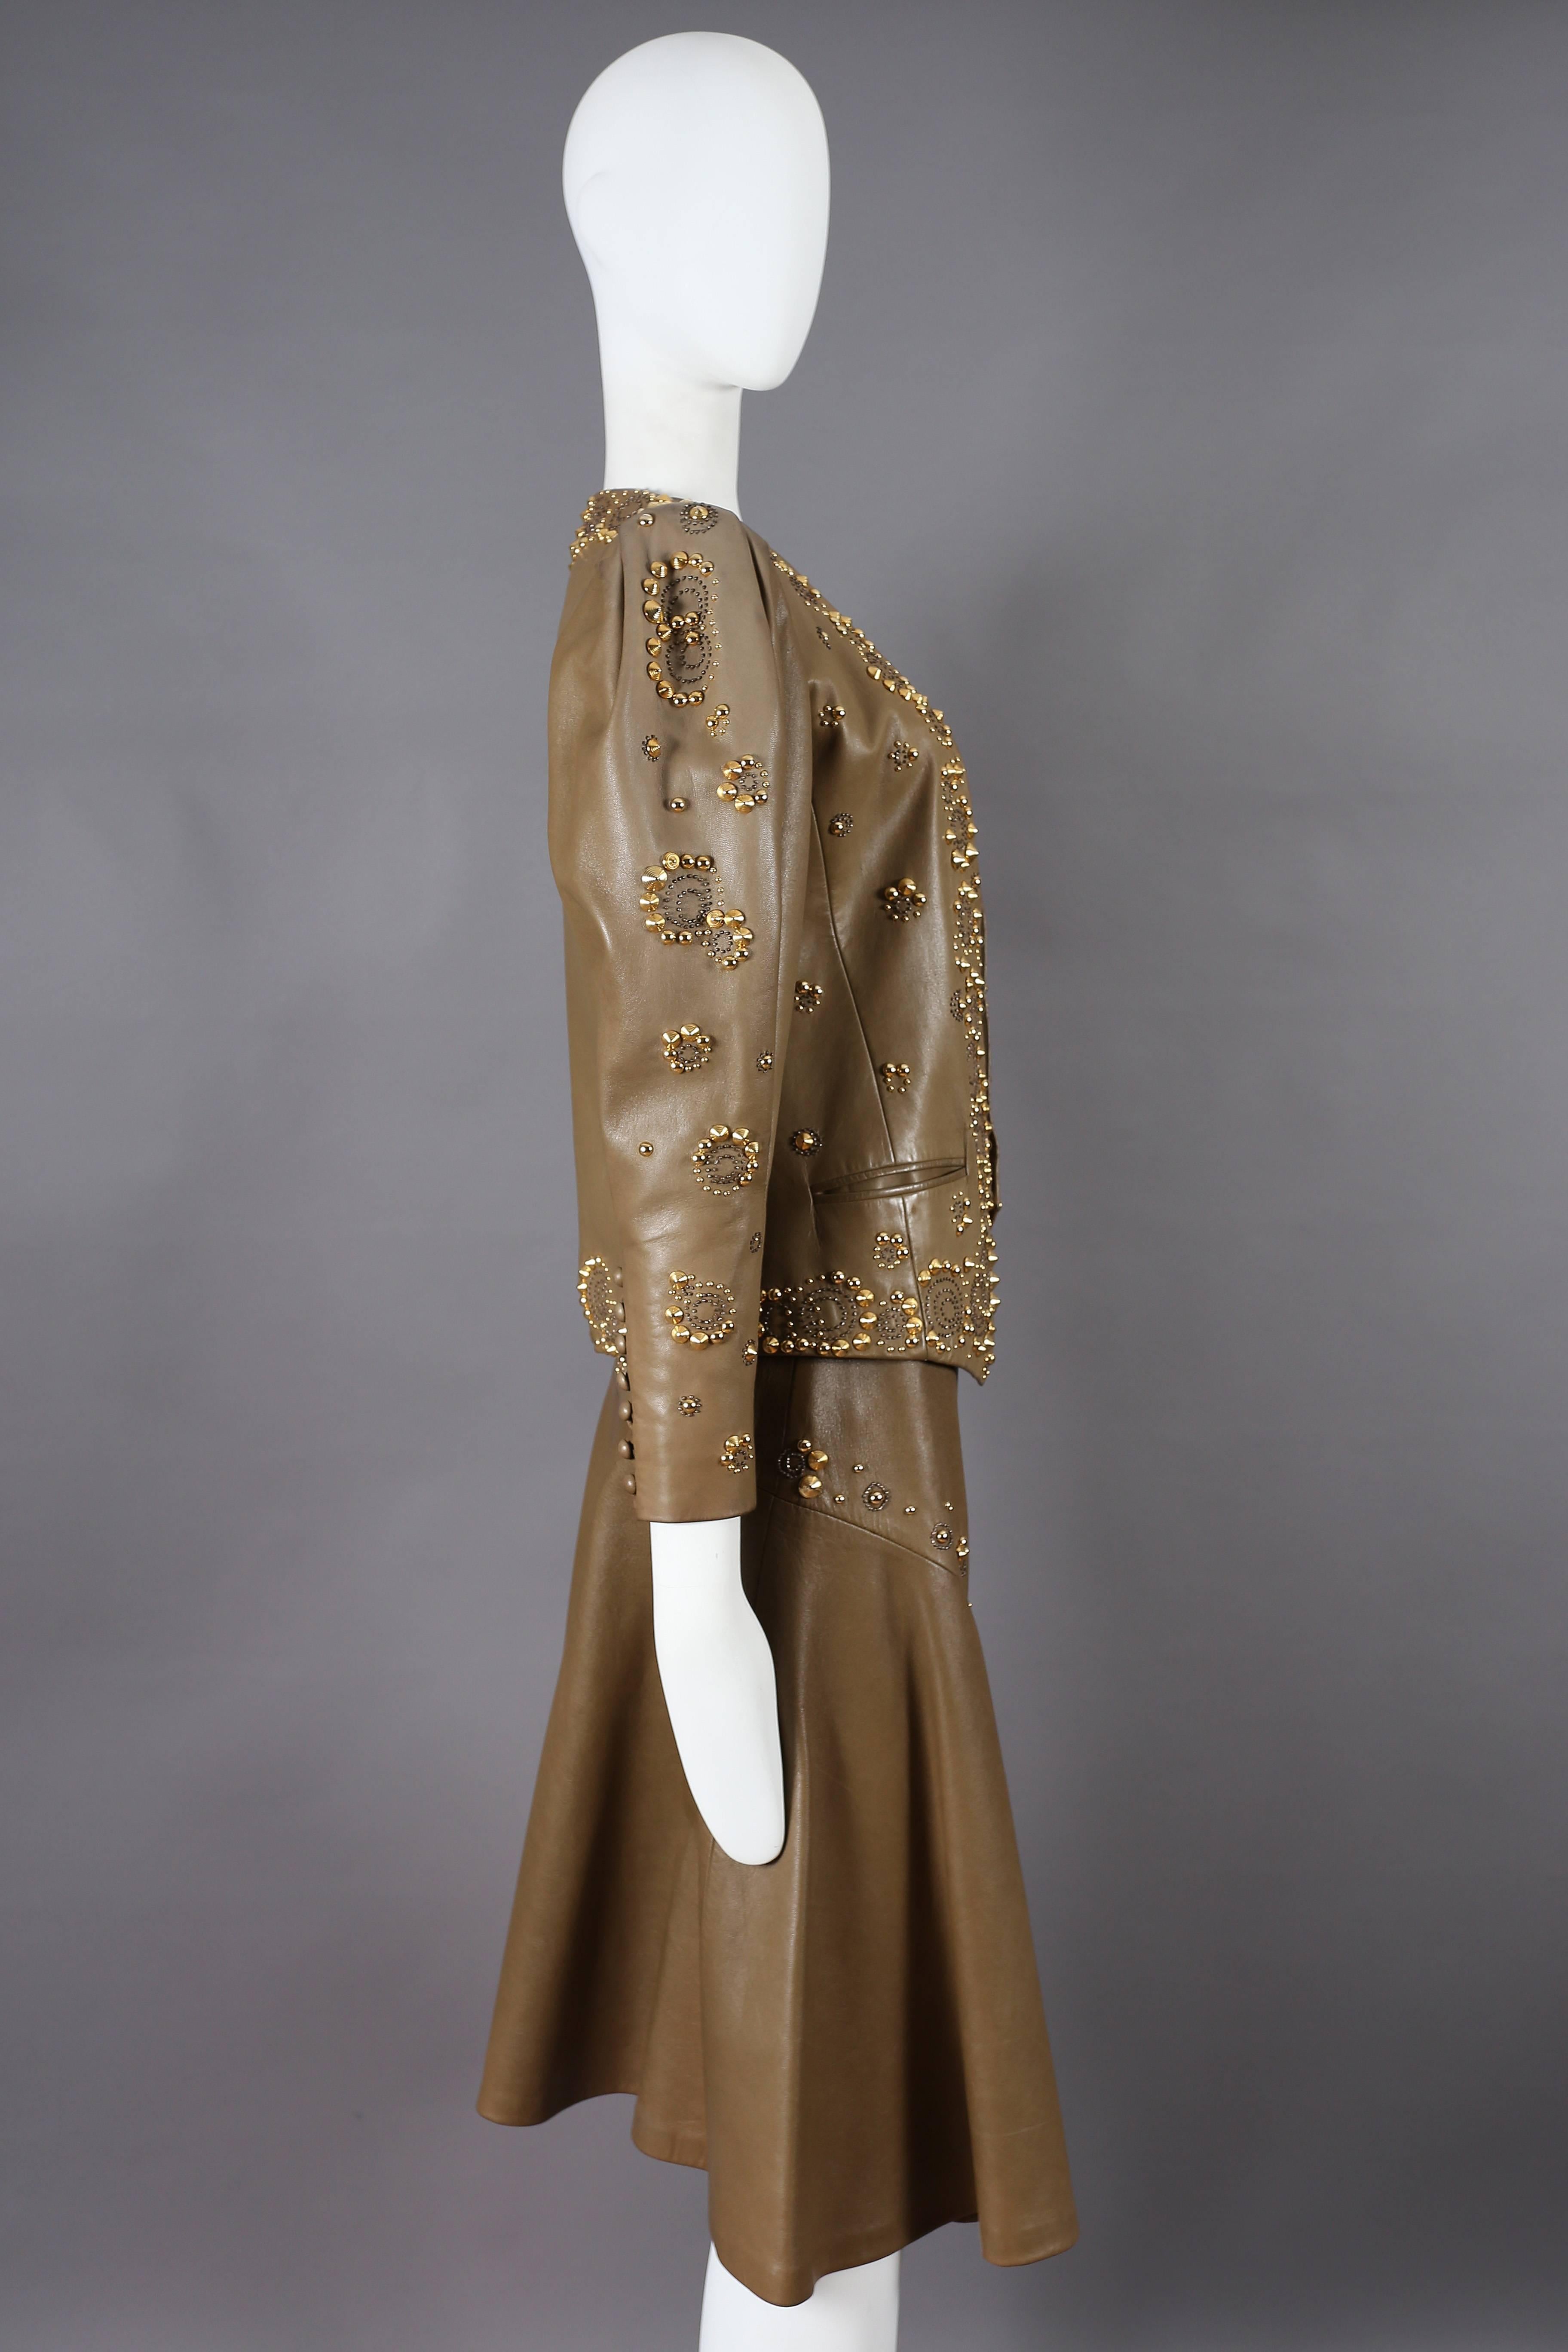 Women's Ted Lapidus gold studded leather skirt suit, circa late 1970s